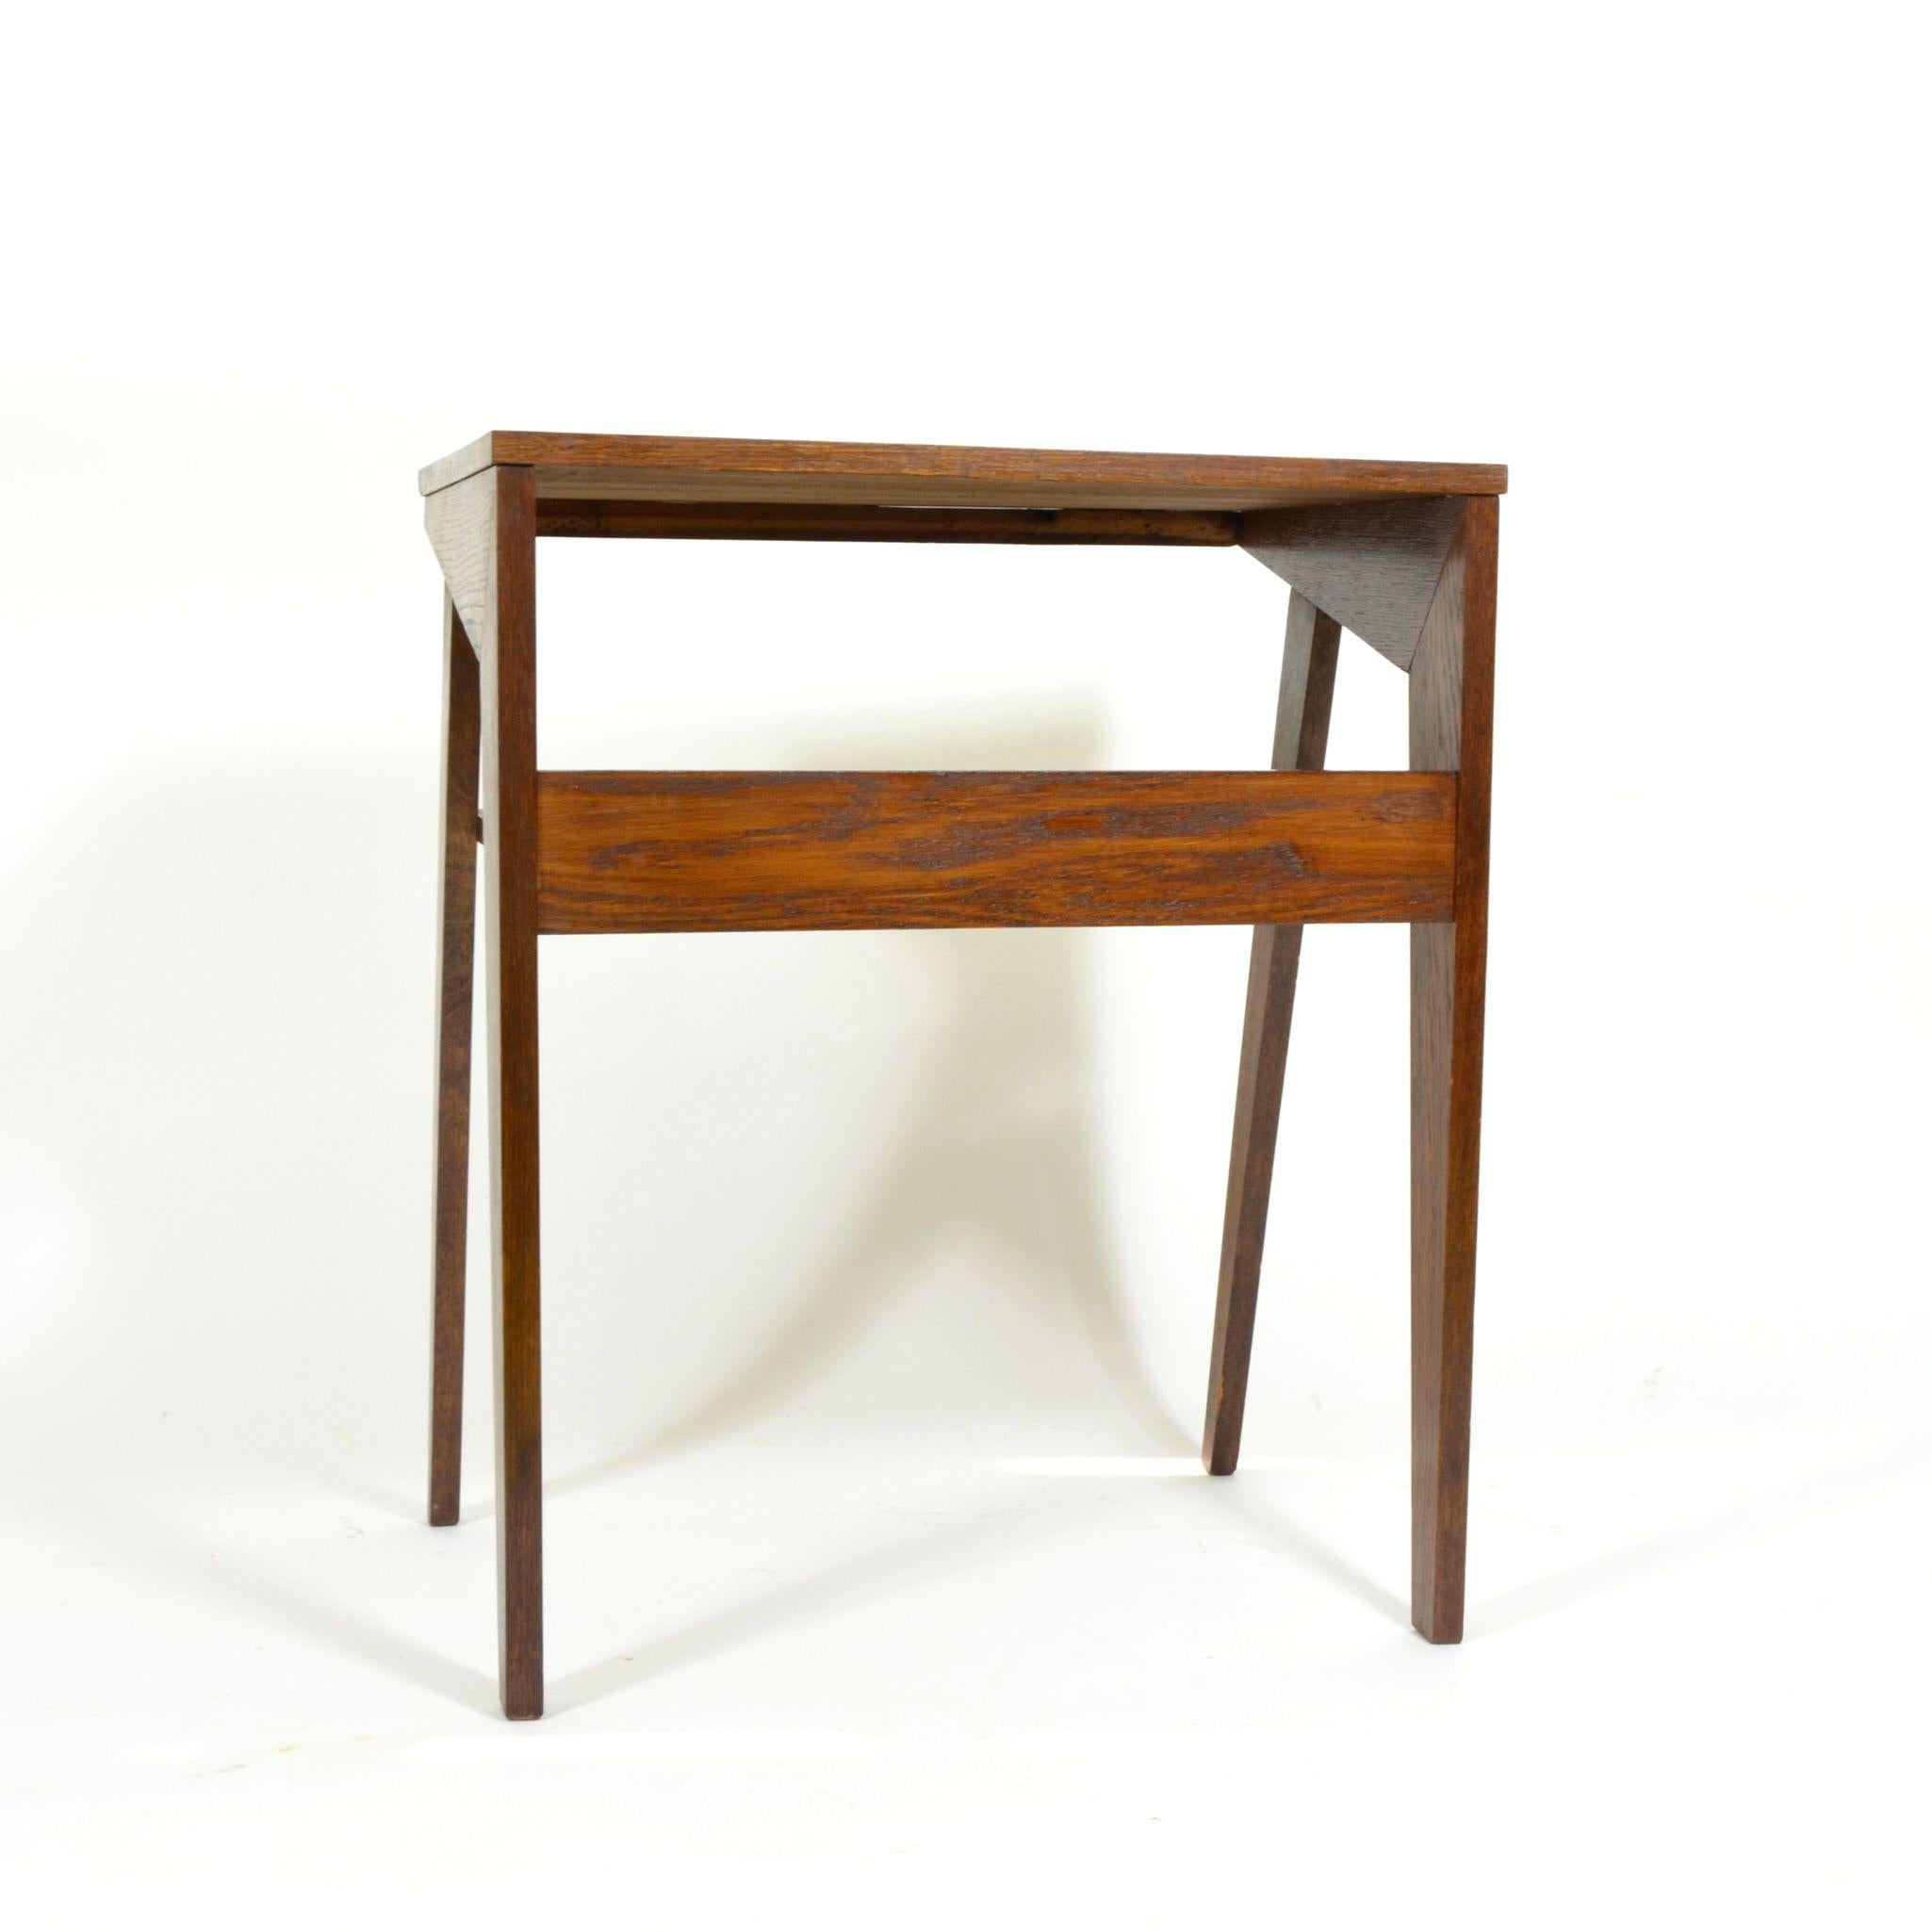 Darked Stained Oak Side Table, 1970s For Sale 2